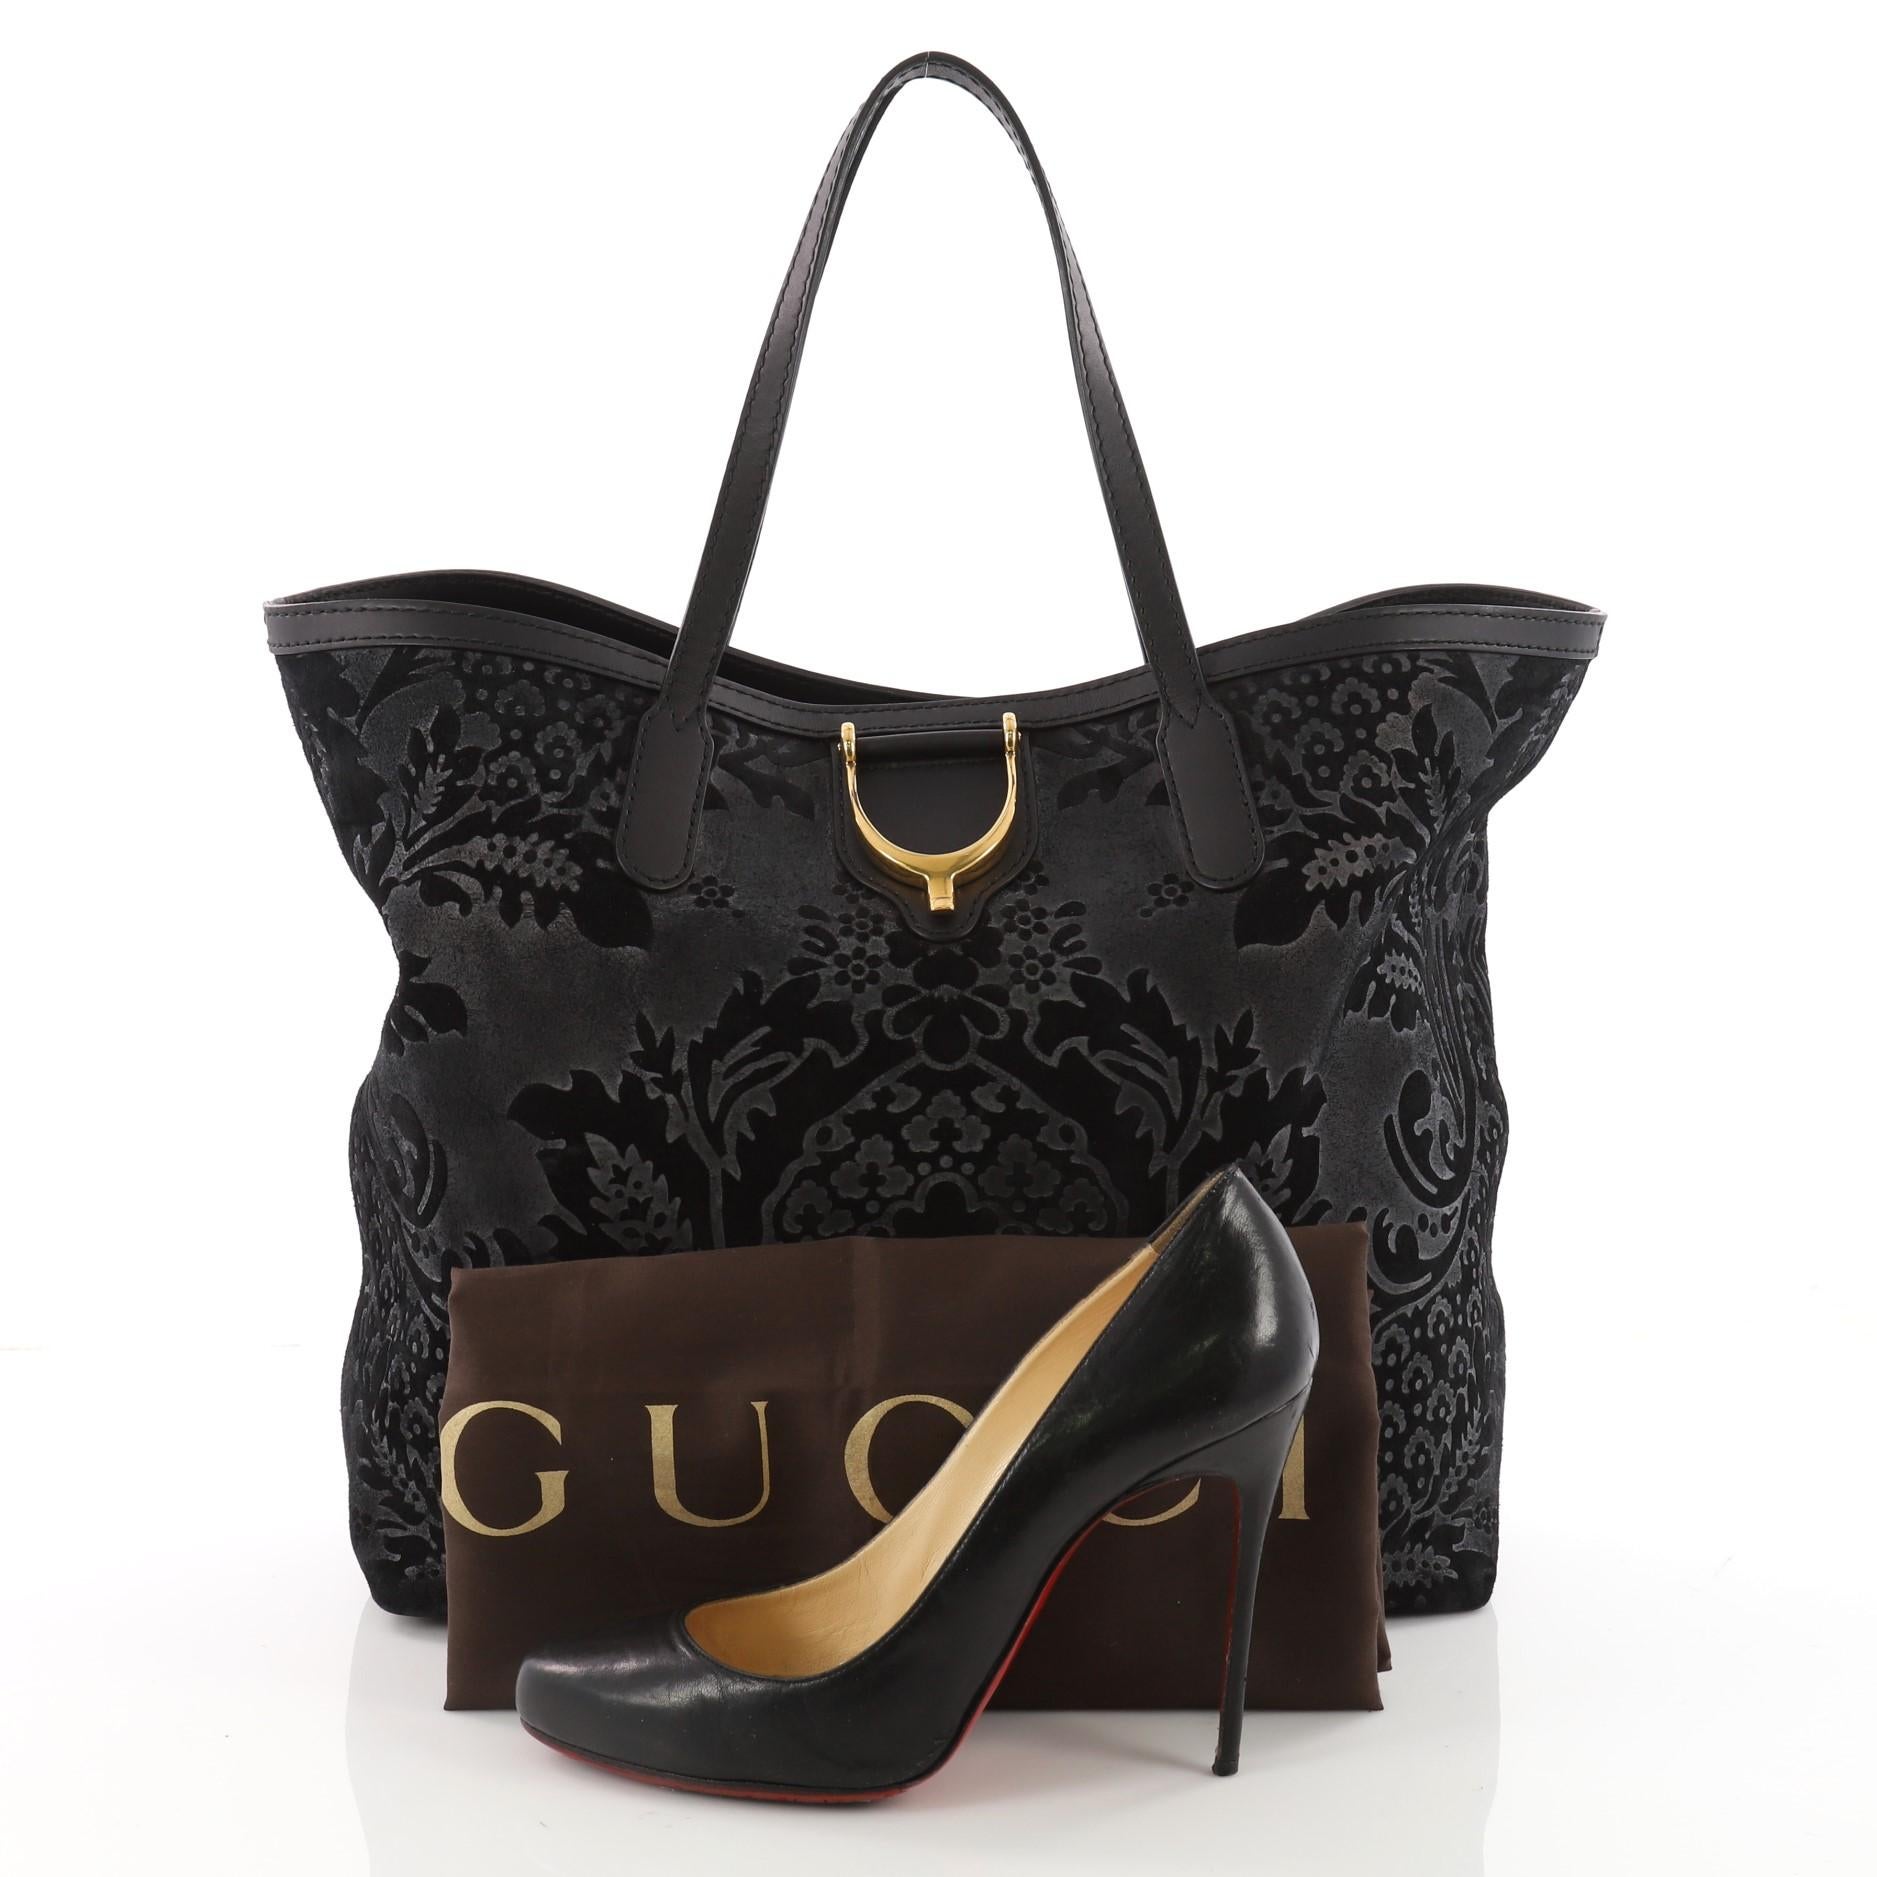 This authentic Gucci Stirrup Tote Brocade Leather is sophisticated yet playful at the same time. Crafted from black brocade damask-patterned embossed nubuck leather and suede, this intricate tote features dual-flat leather handles, black leather